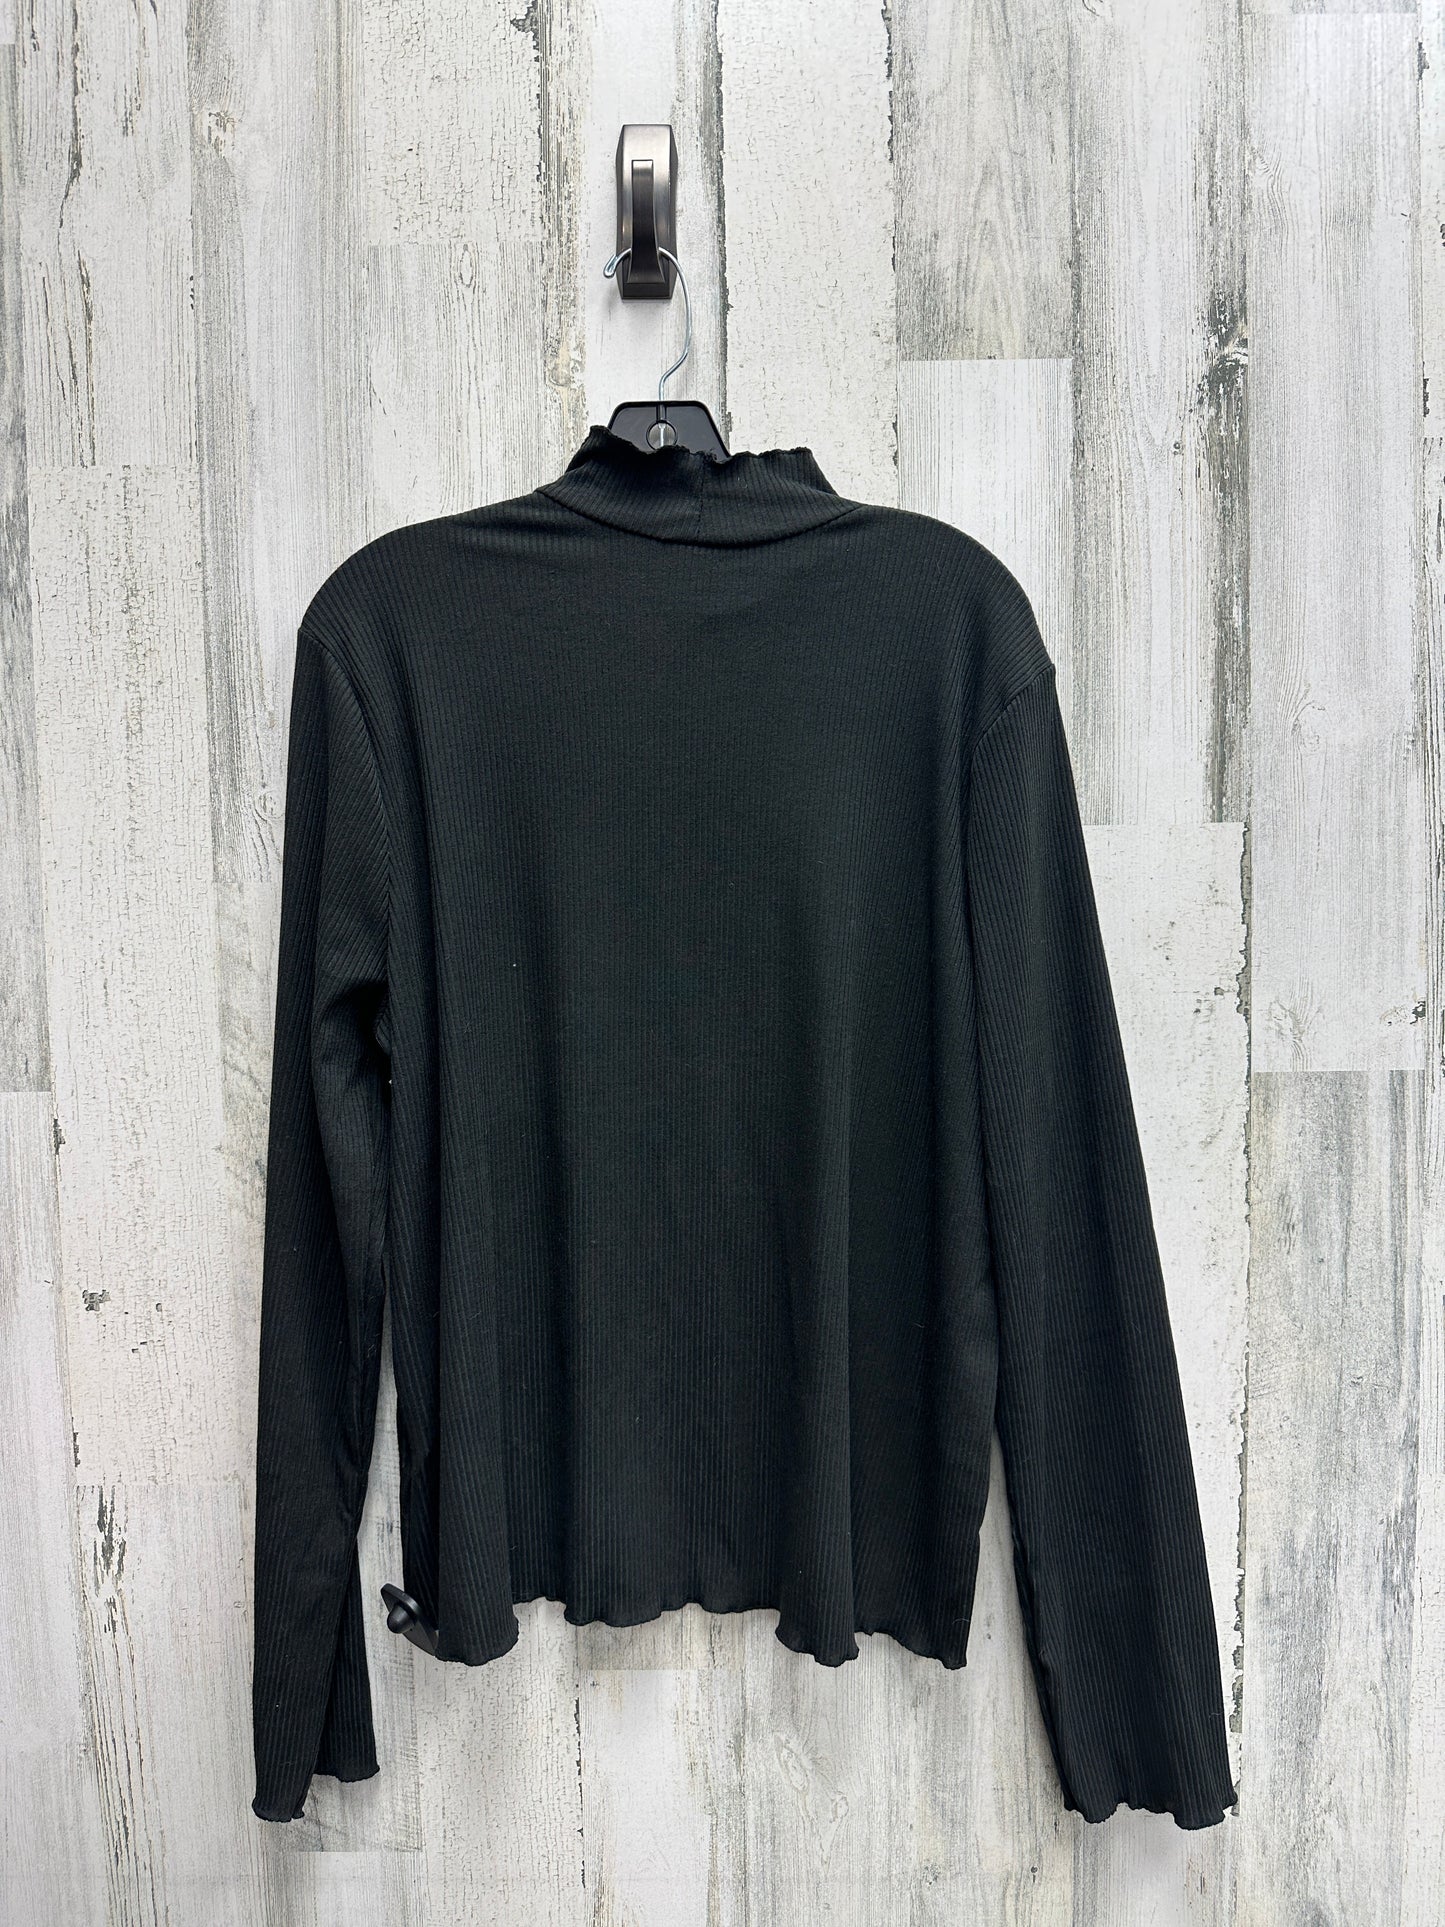 Top Long Sleeve Basic By White Birch  Size: 3x